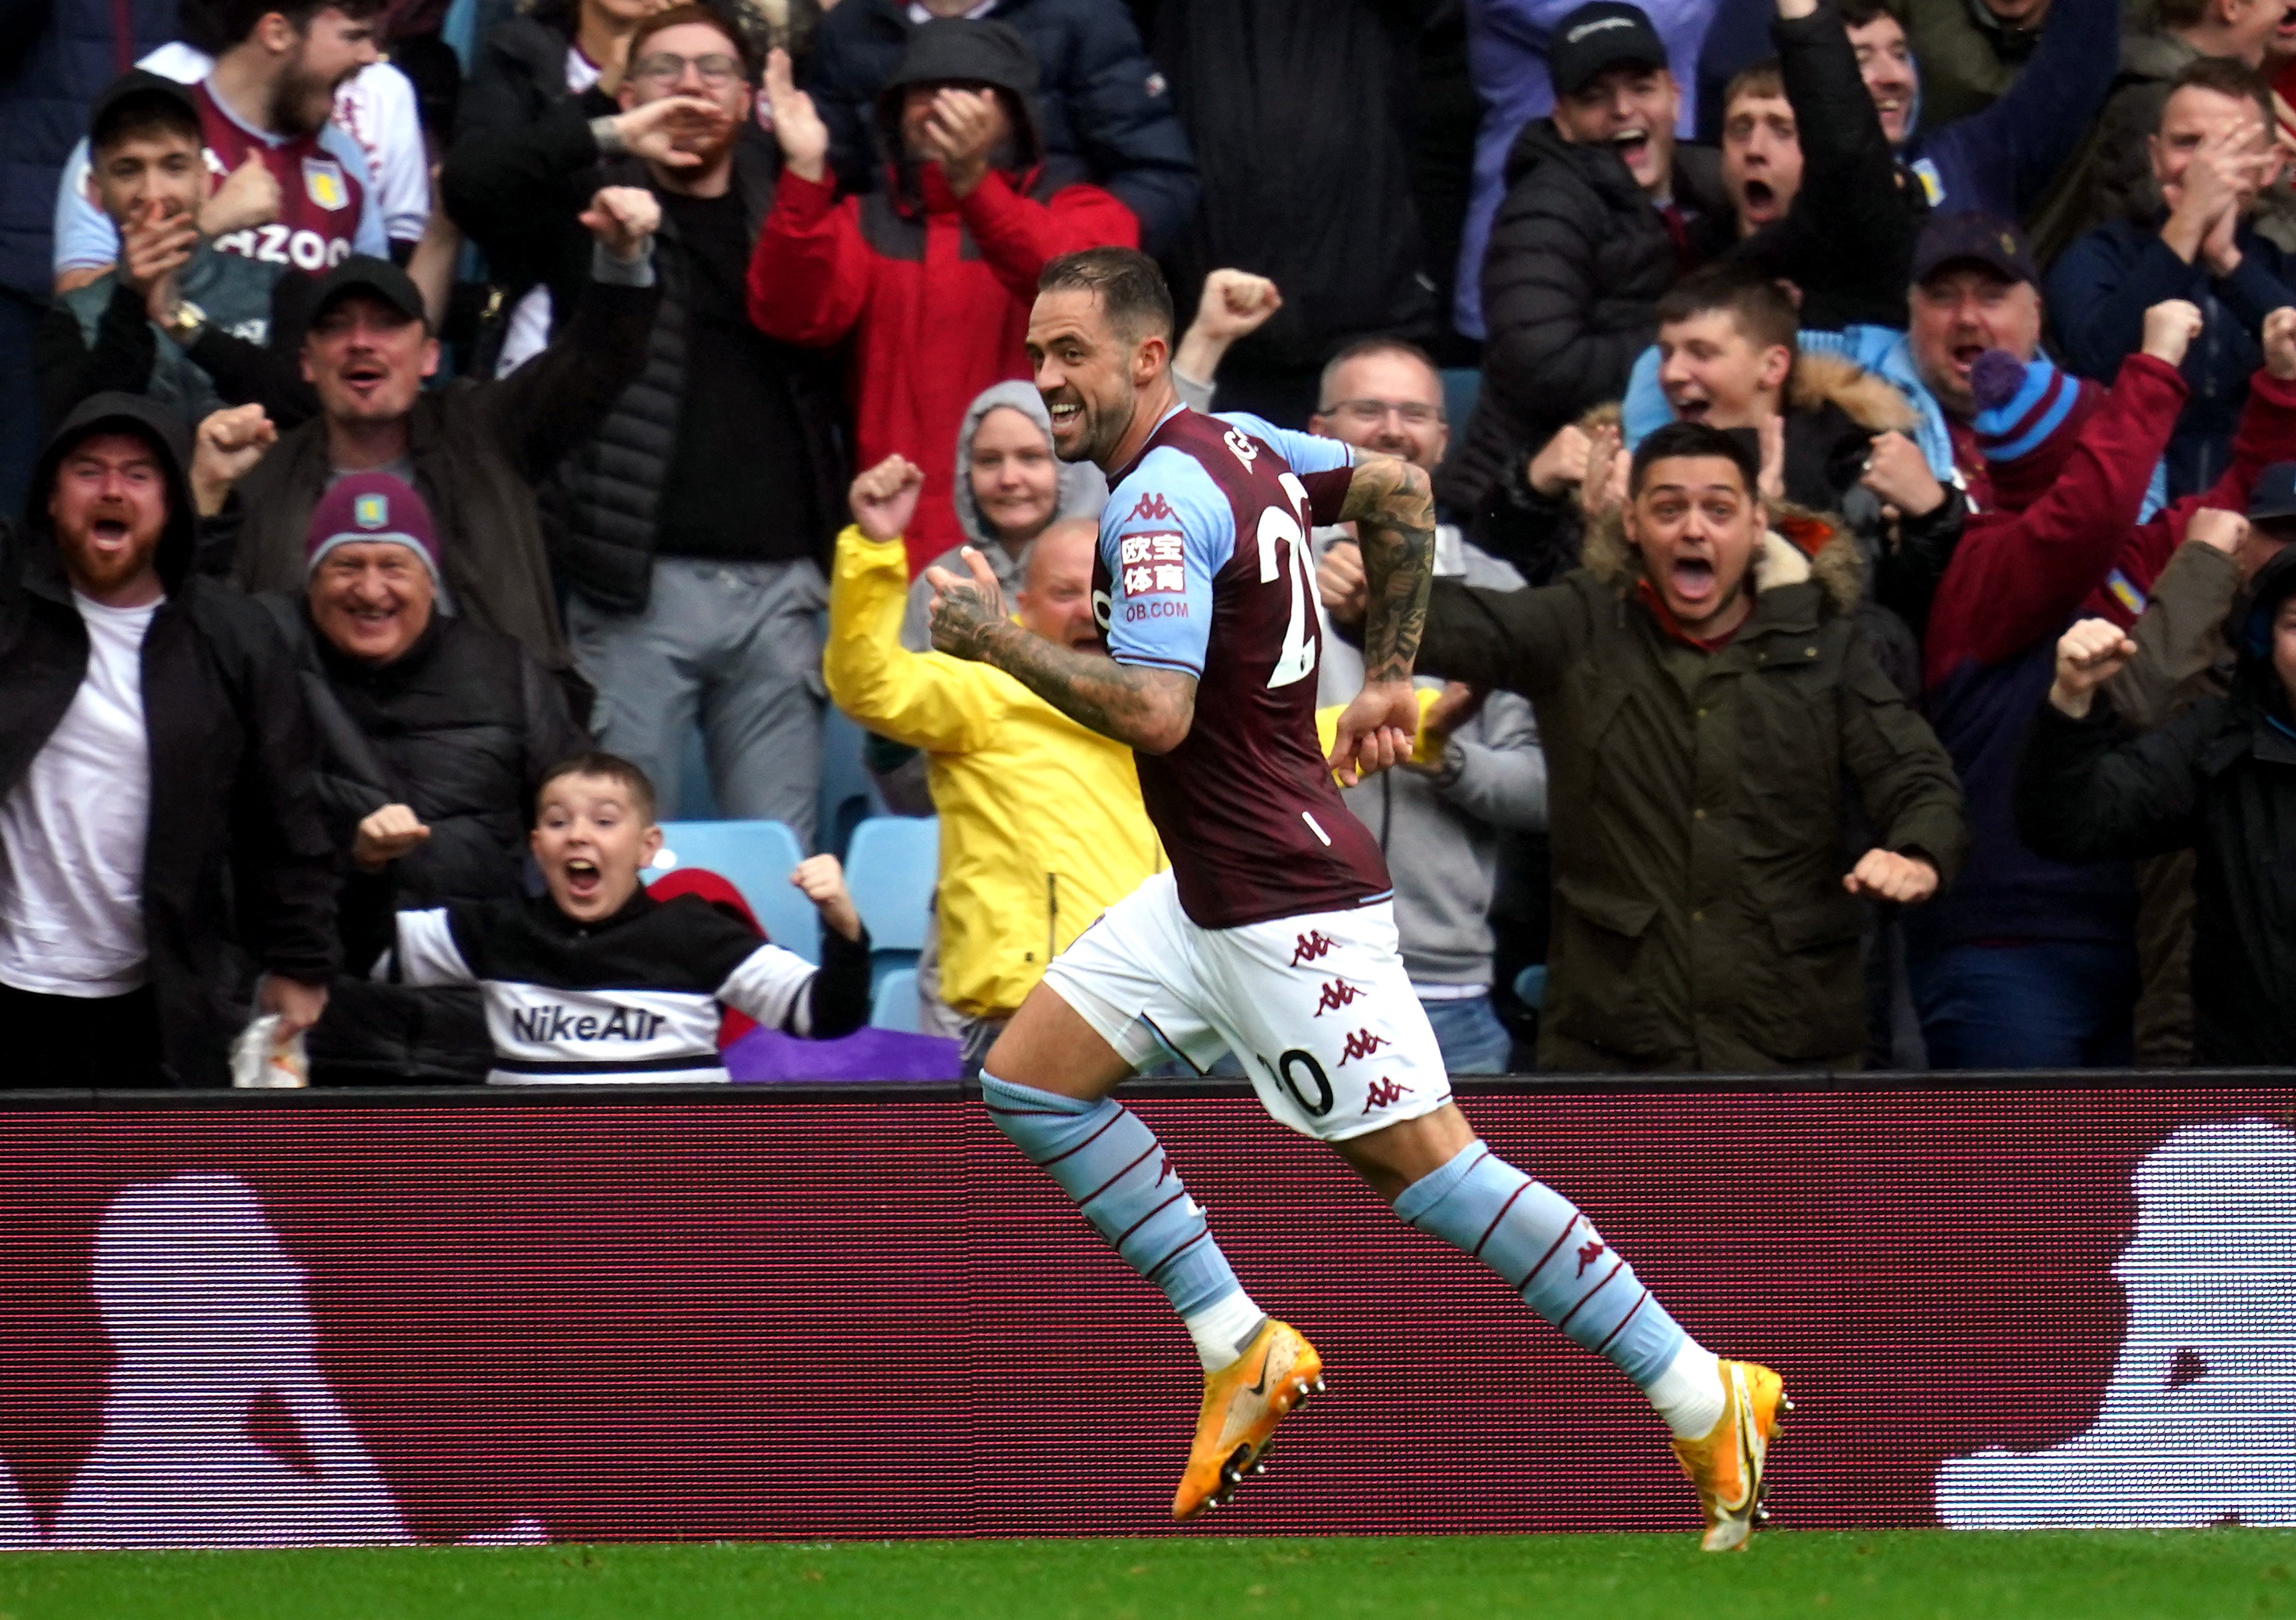 Danny Ings joined Aston Villa from Southampton in the summer